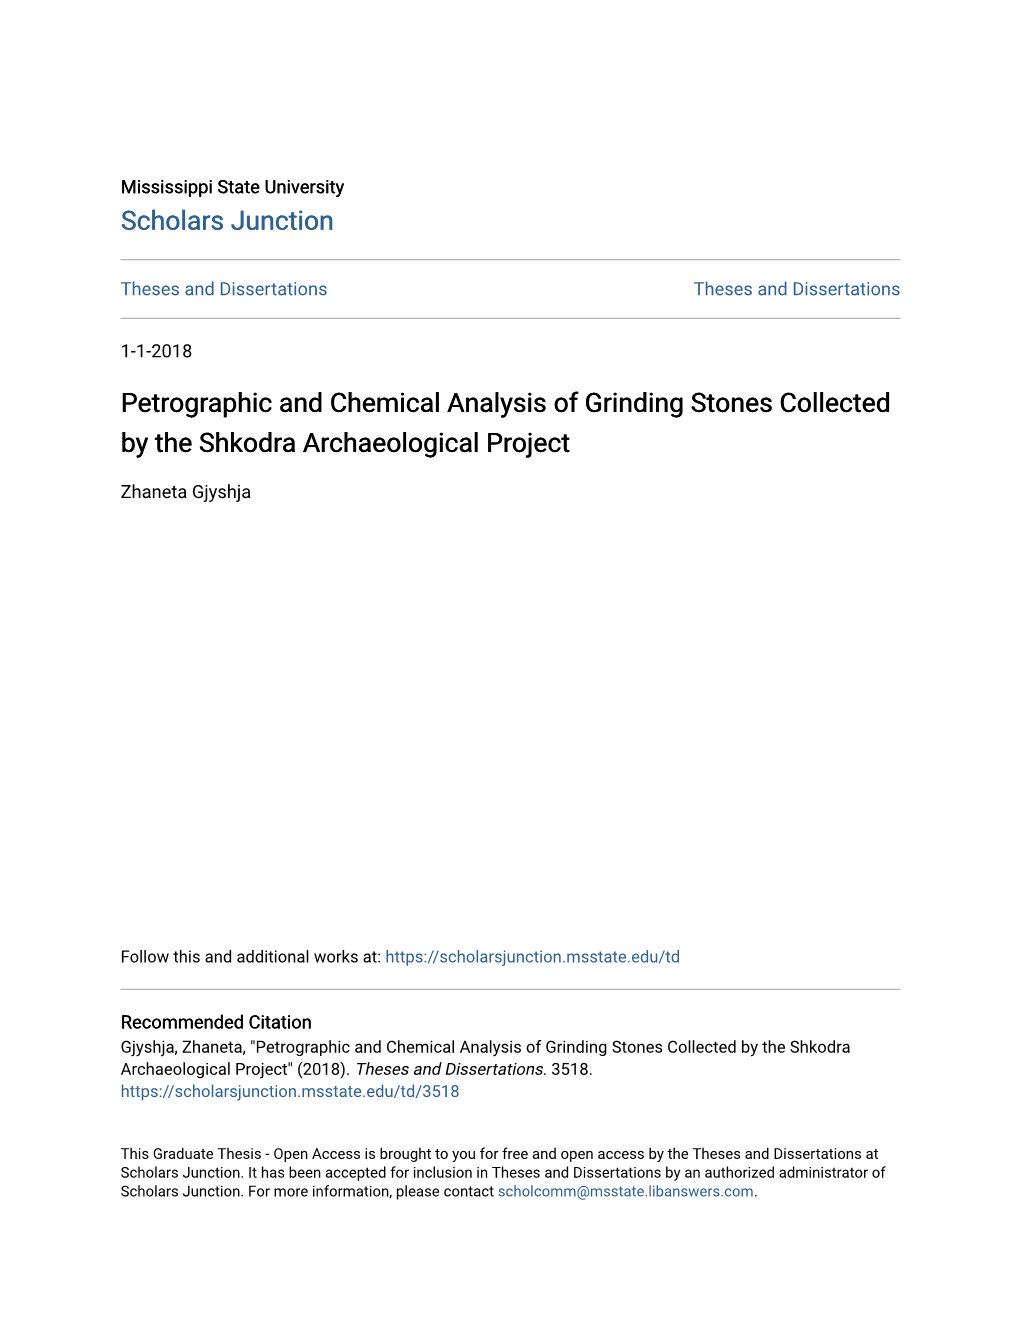 Petrographic and Chemical Analysis of Grinding Stones Collected by the Shkodra Archaeological Project